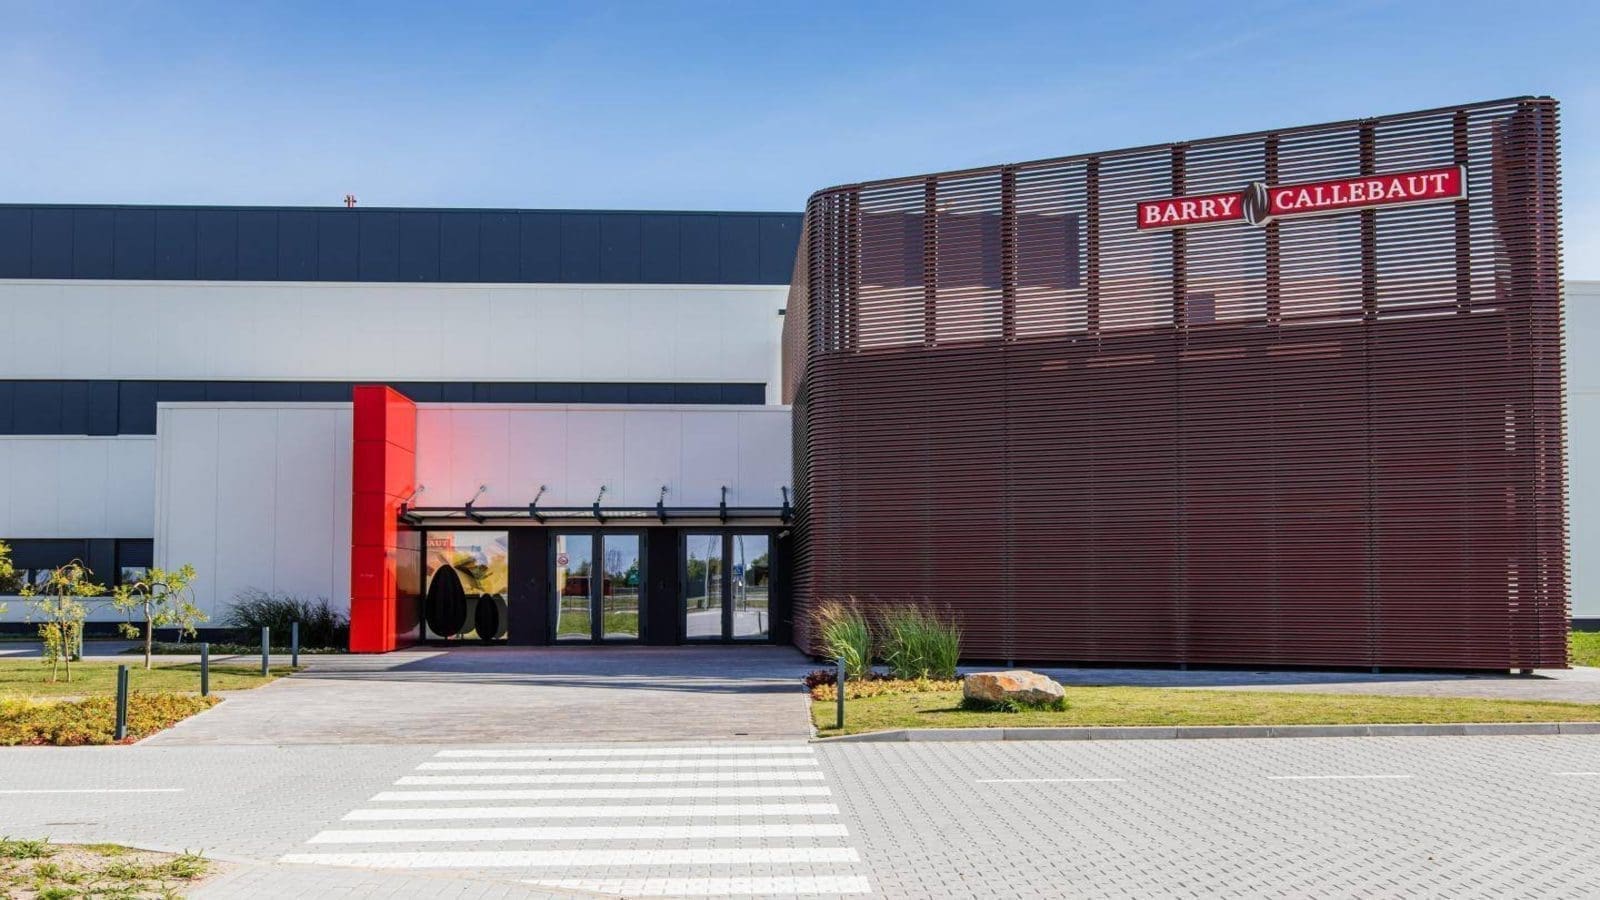 Barry Callebaut expands presence in Southeastern Europe with inaugration of US$64m chocolate factory in Serbia